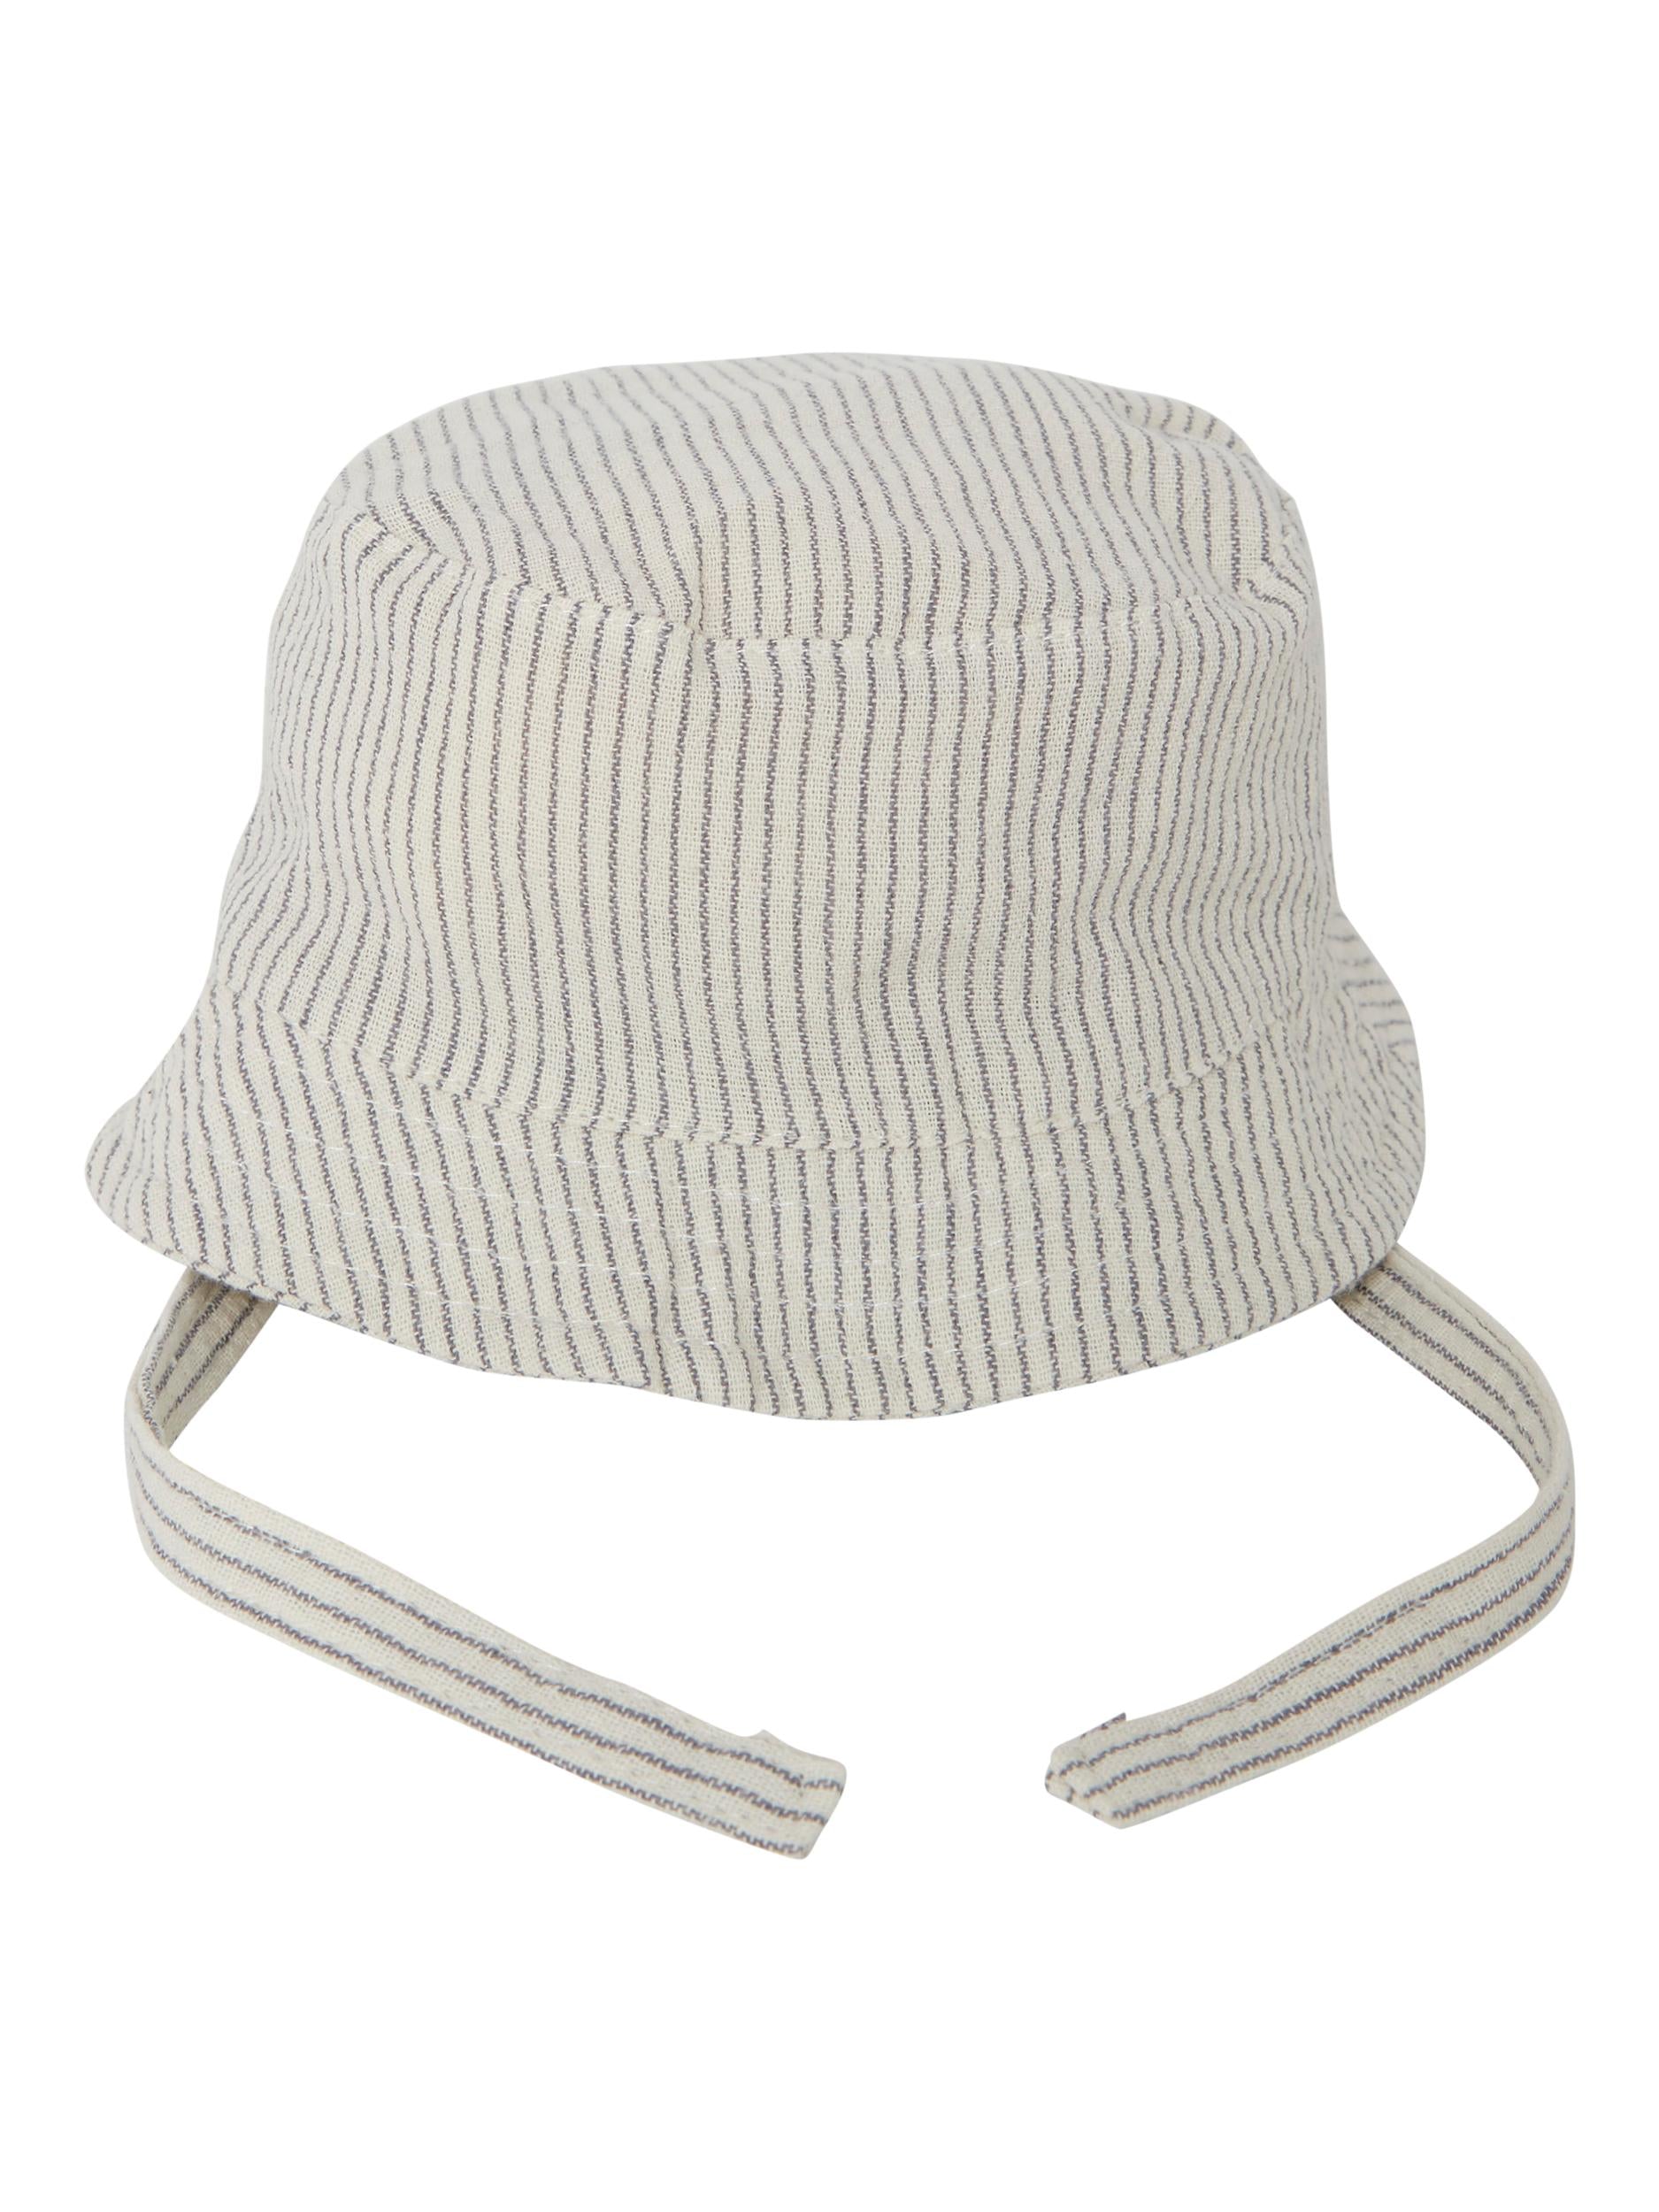 Hefanne Sun Hat With Earflaps - Grisaille Full View